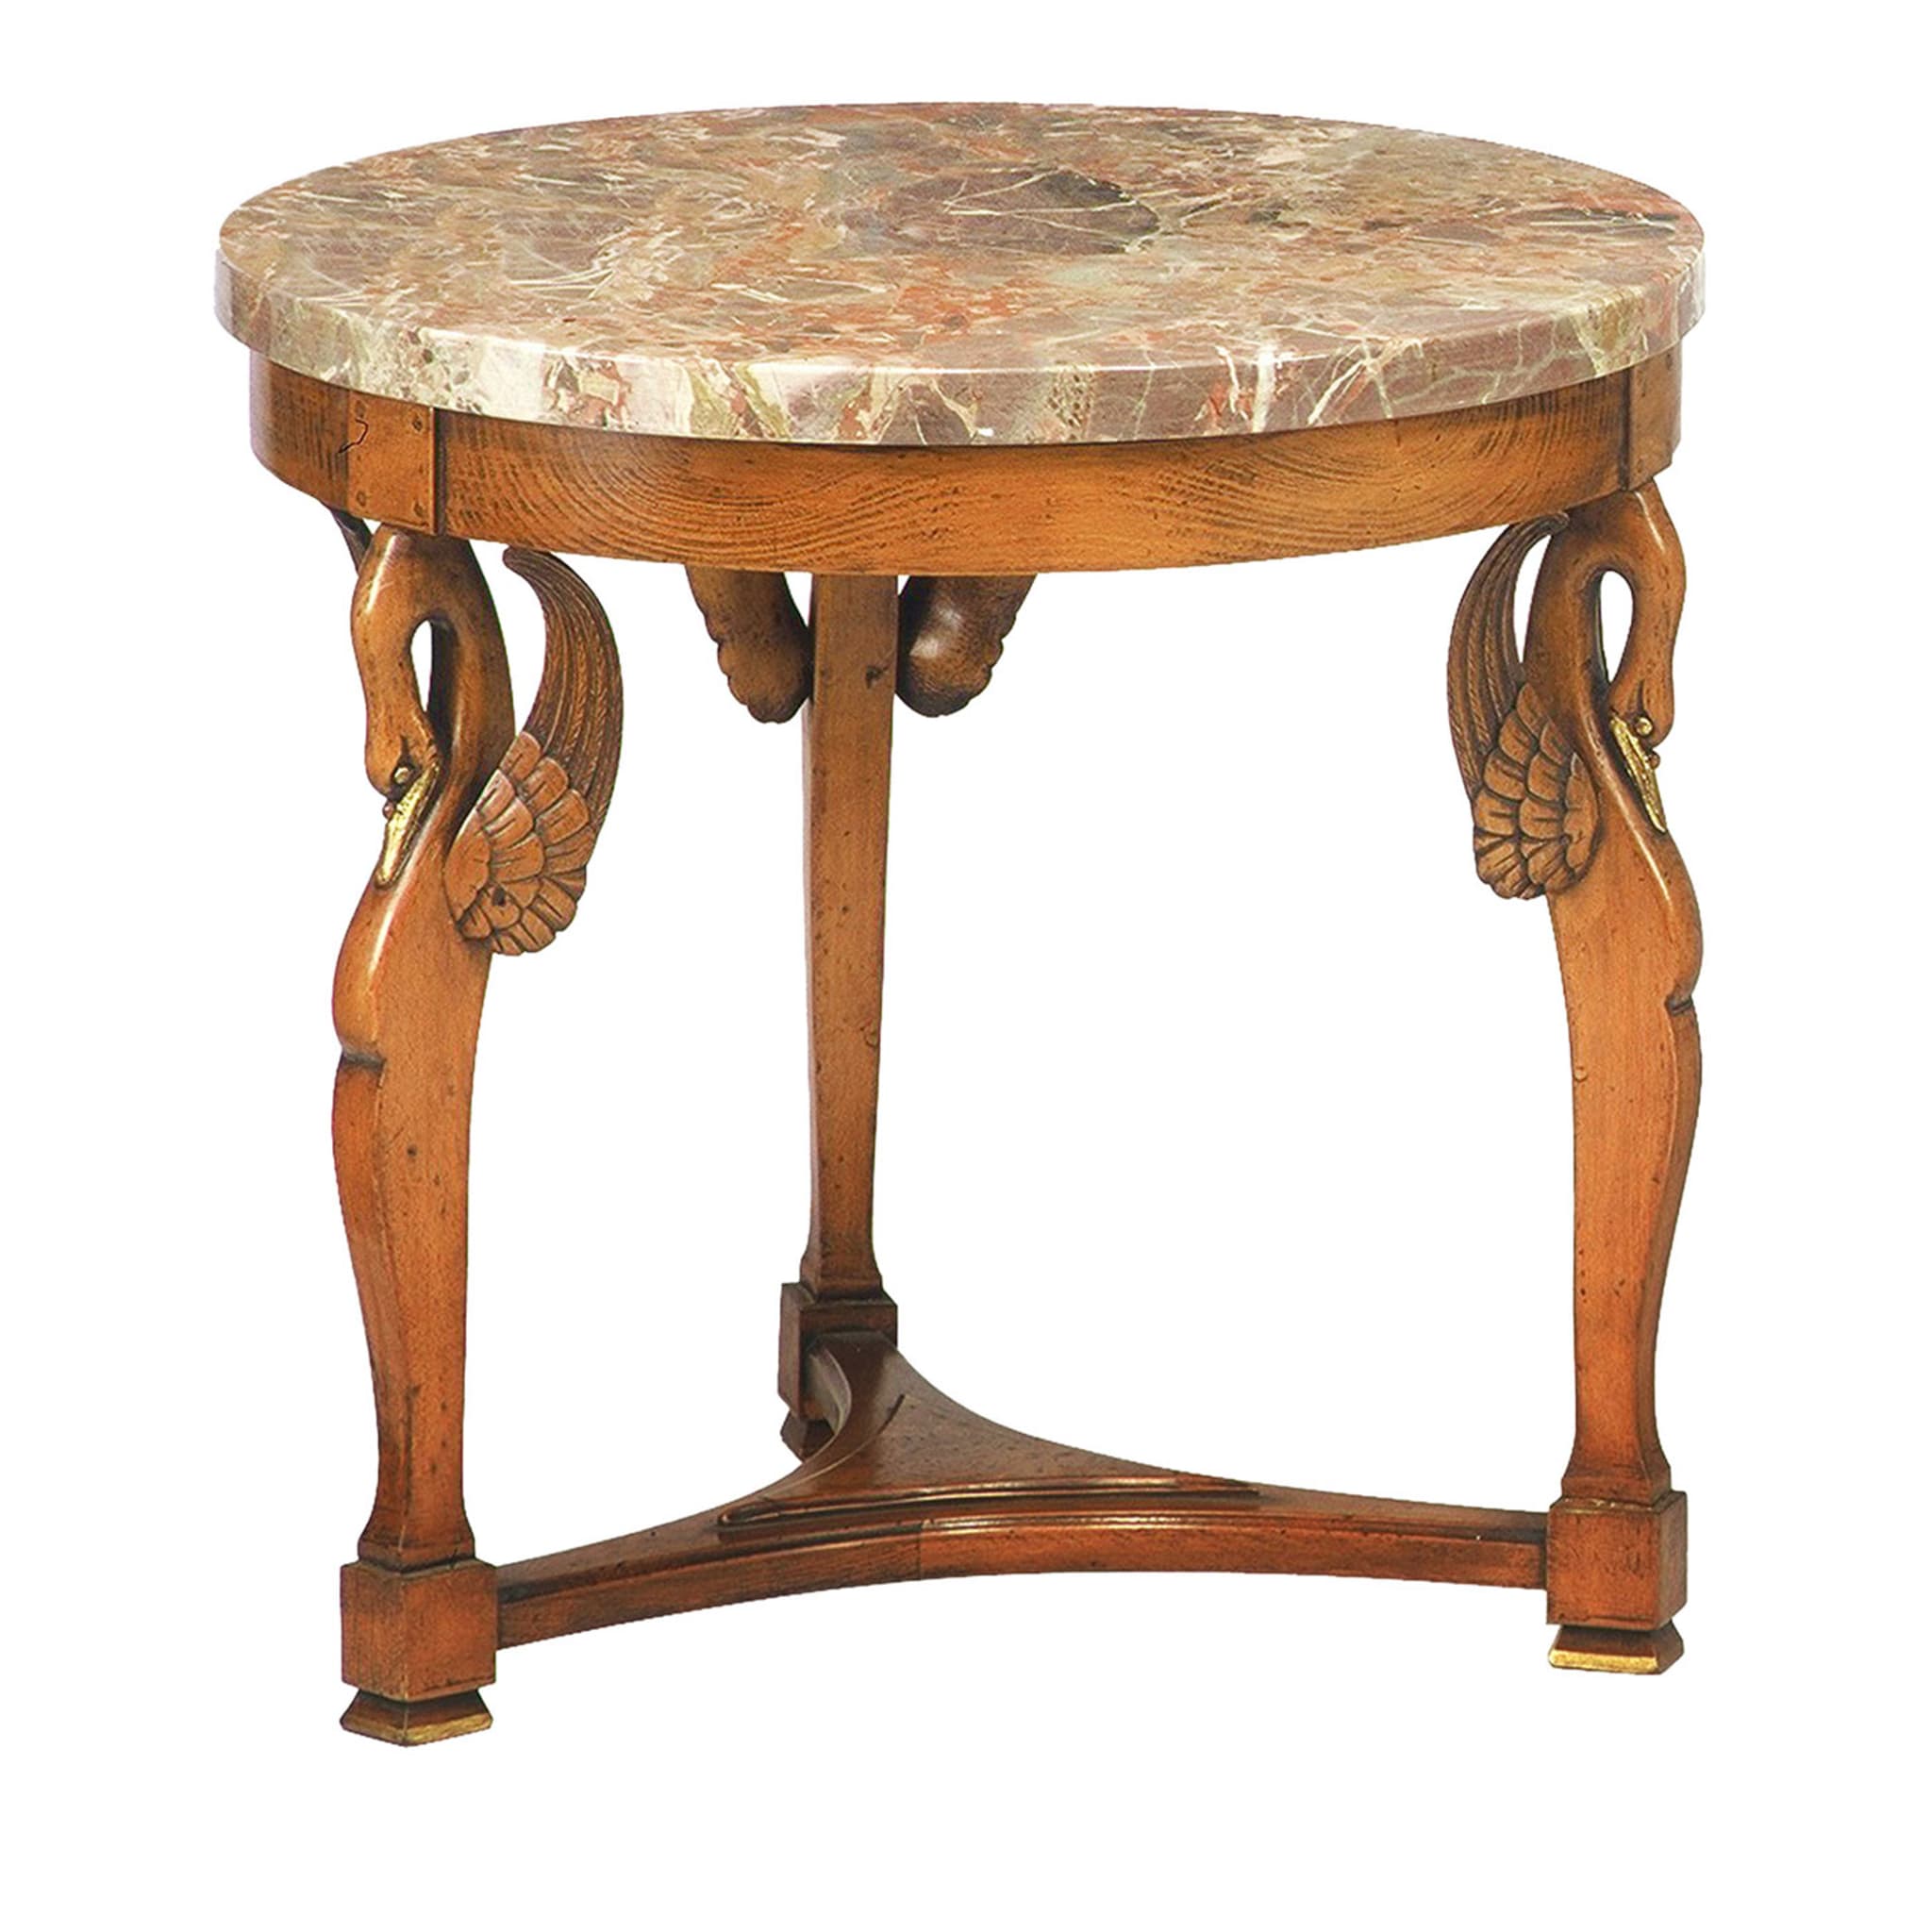 French Empire-Style Round Accent Table with Macchiavecchia Top - Main view